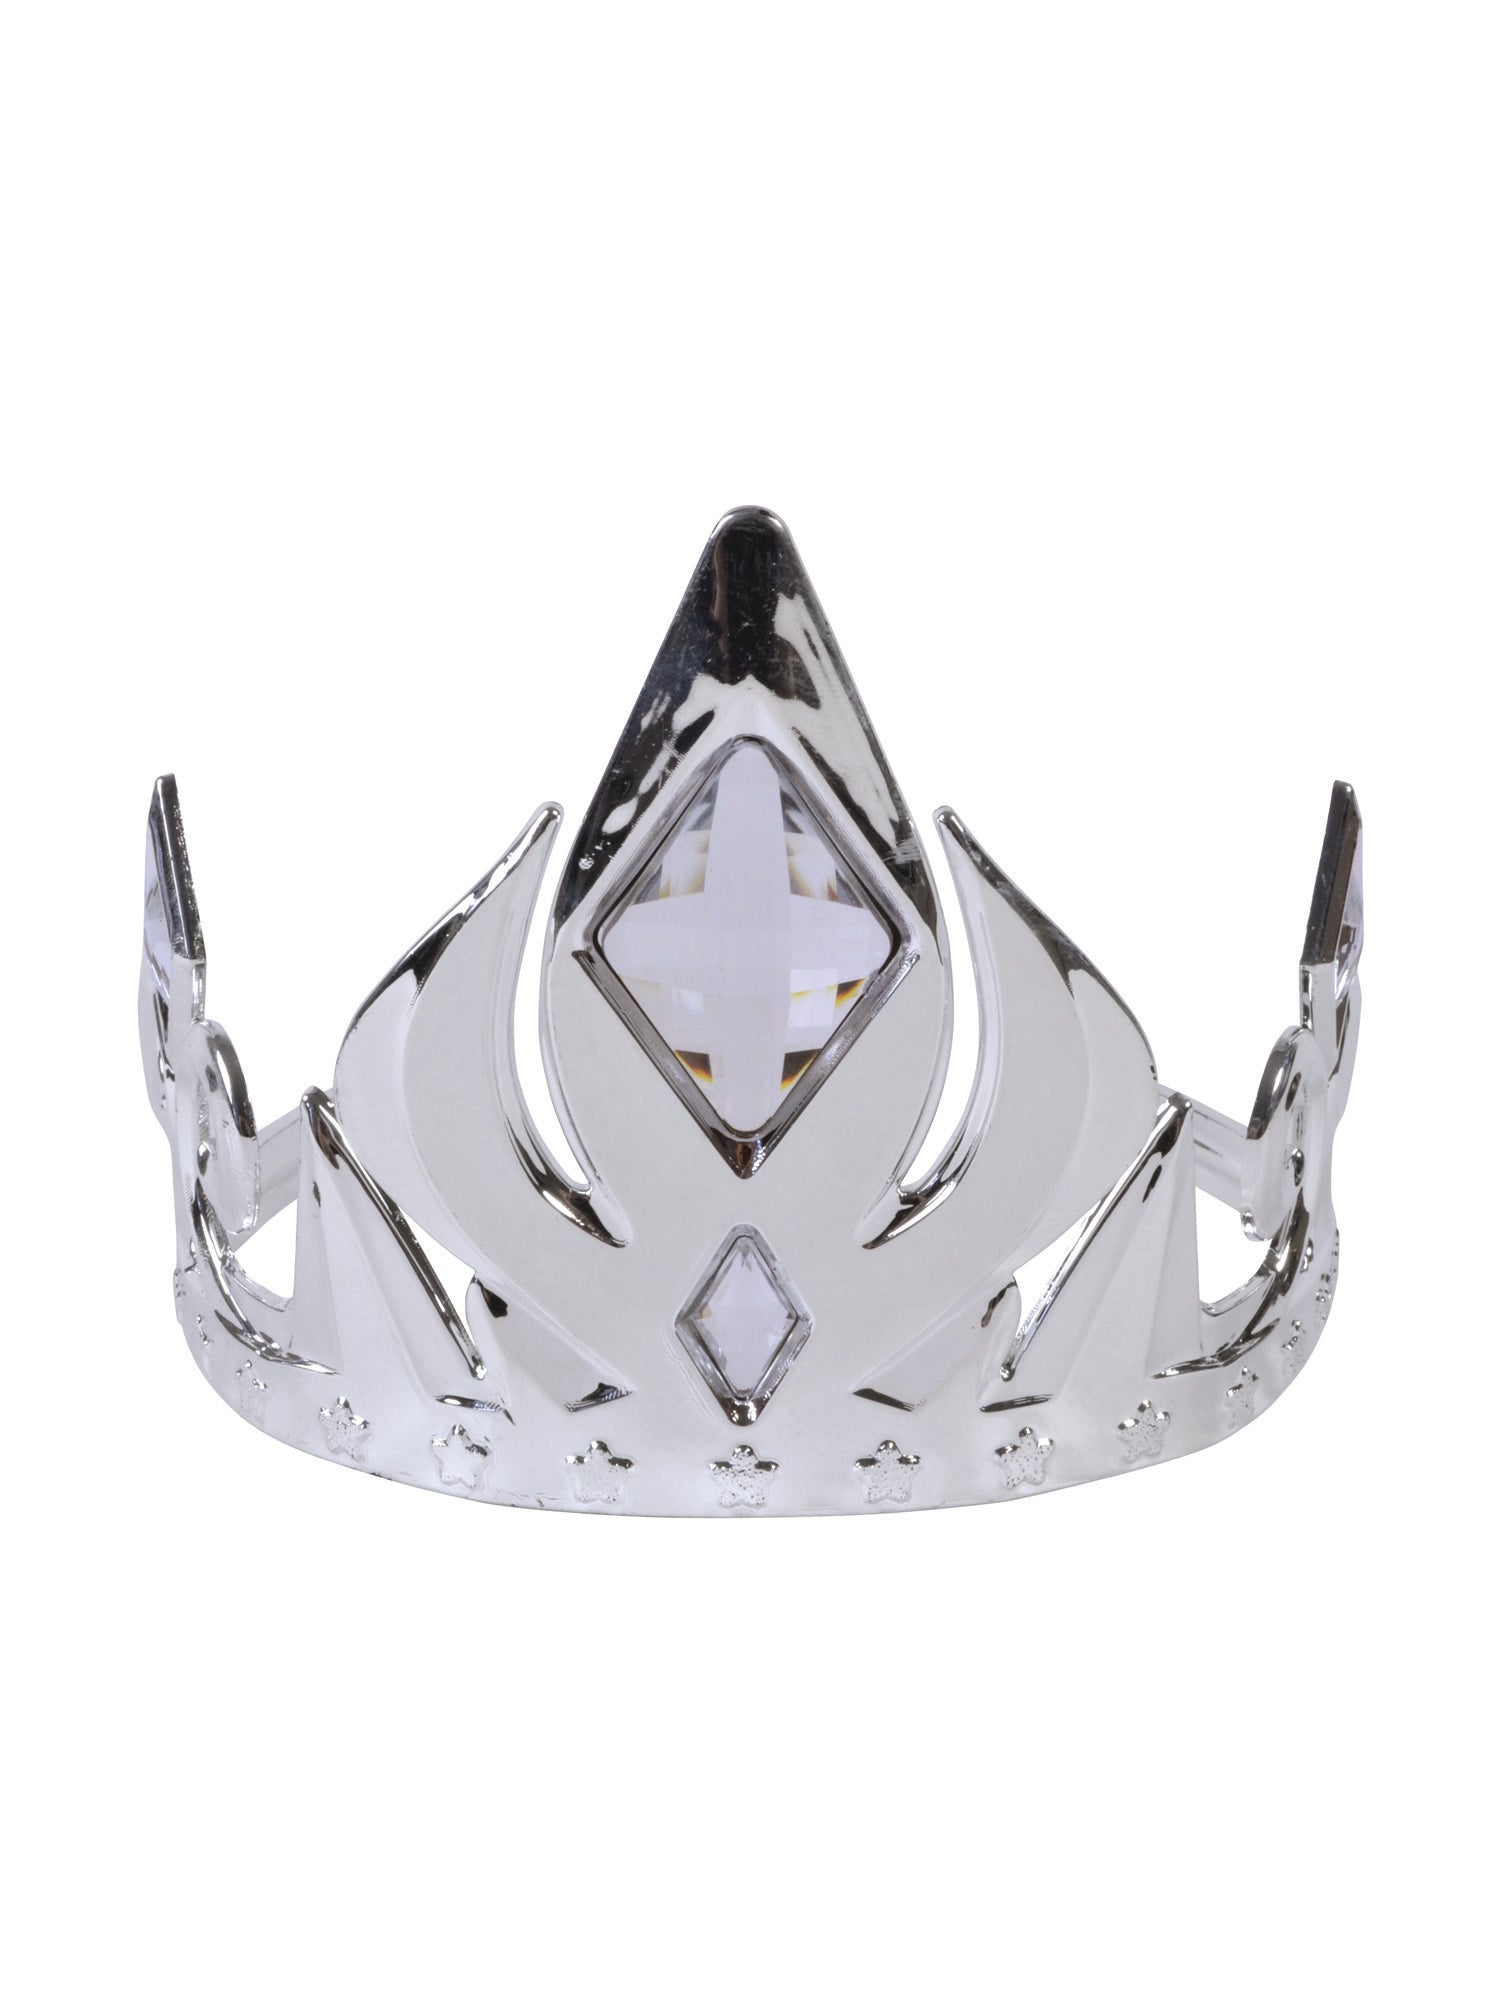 Tiara, Multi, Generic, Accessories, One Size, Front